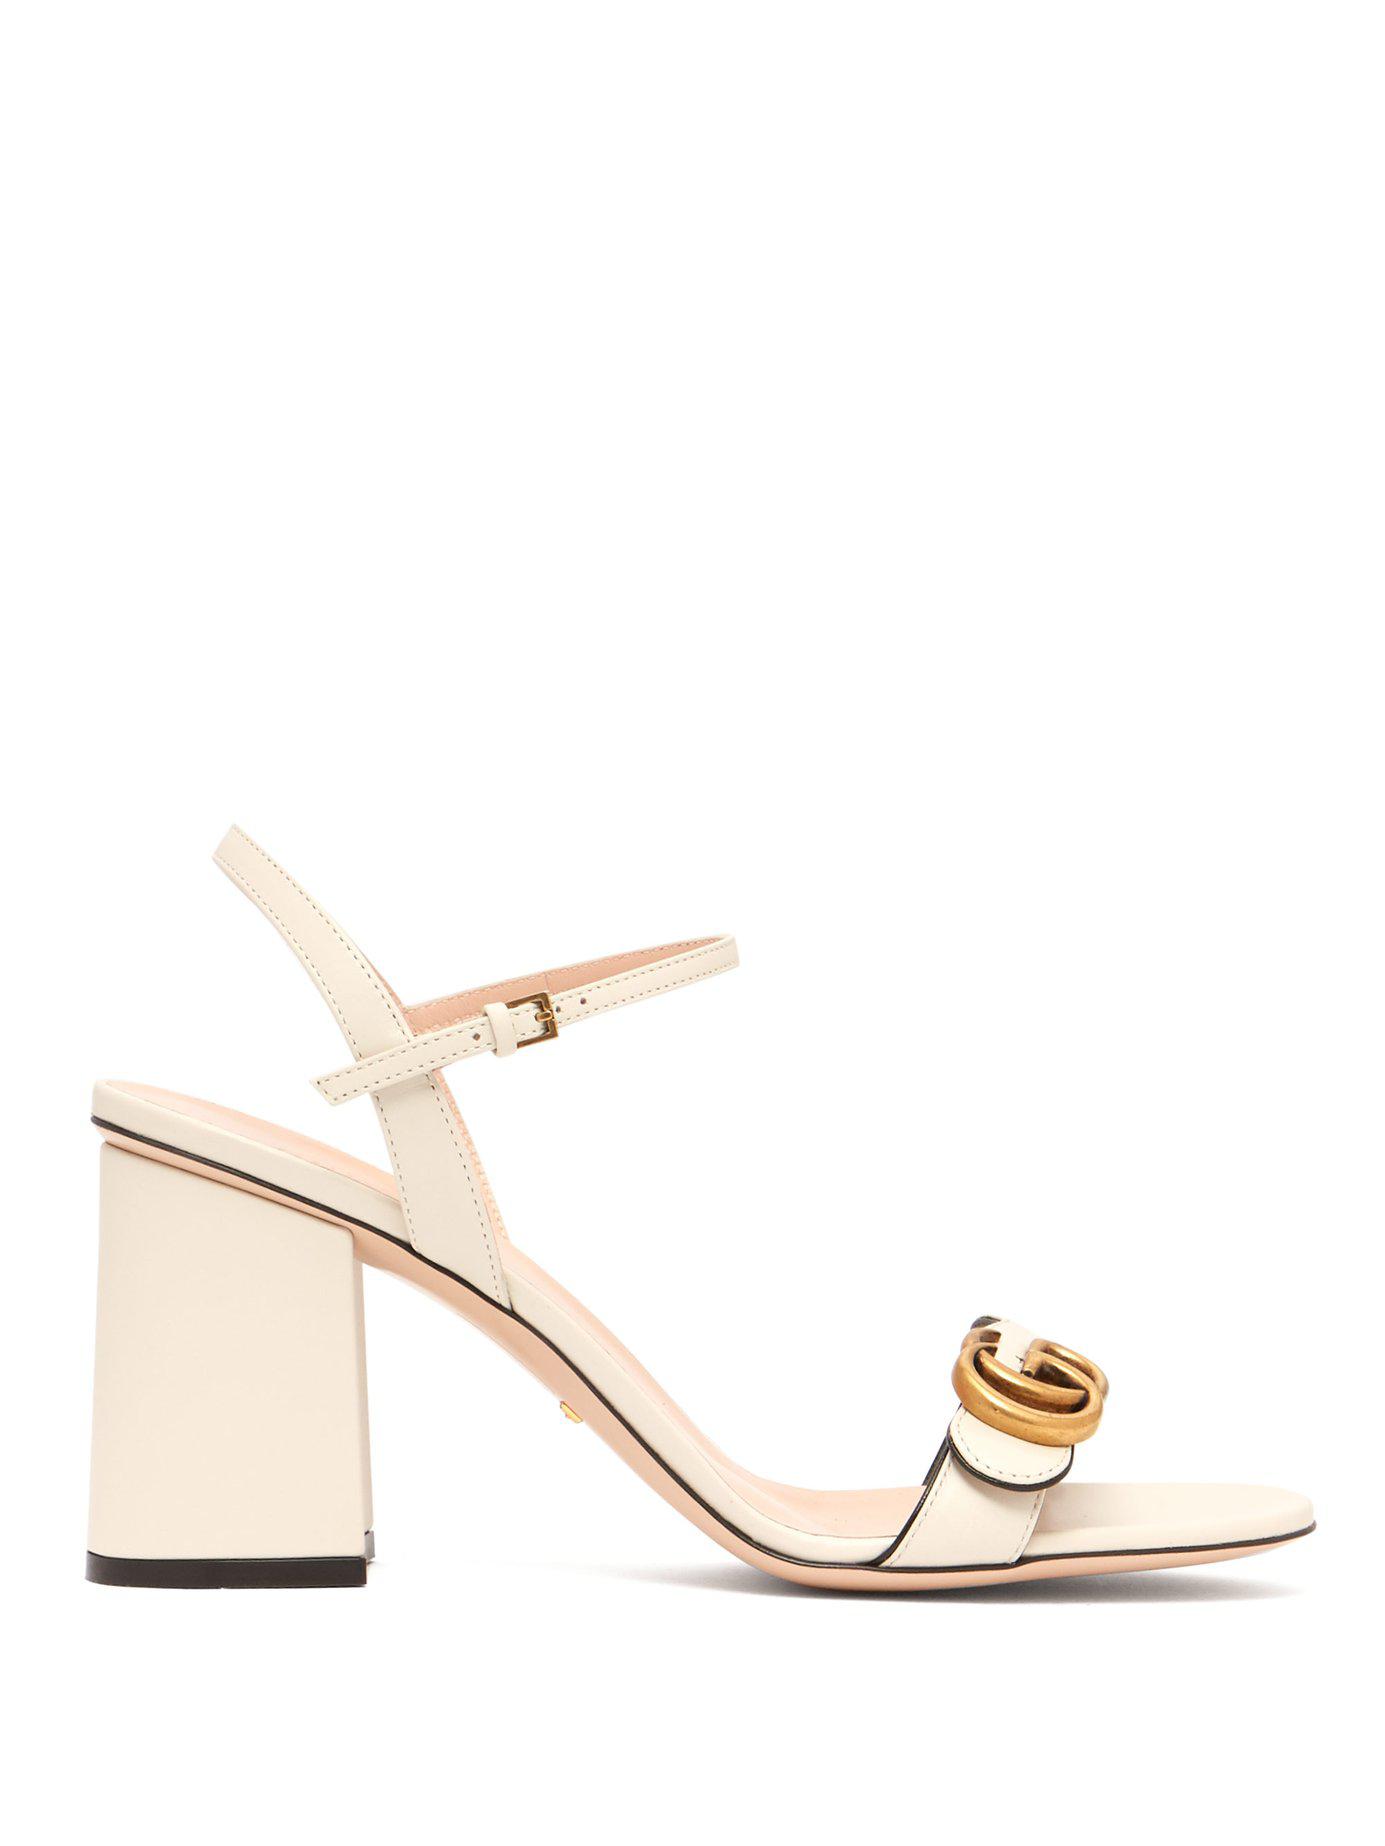 Gucci Gg Marmont Leather Block Heels in White - Lyst